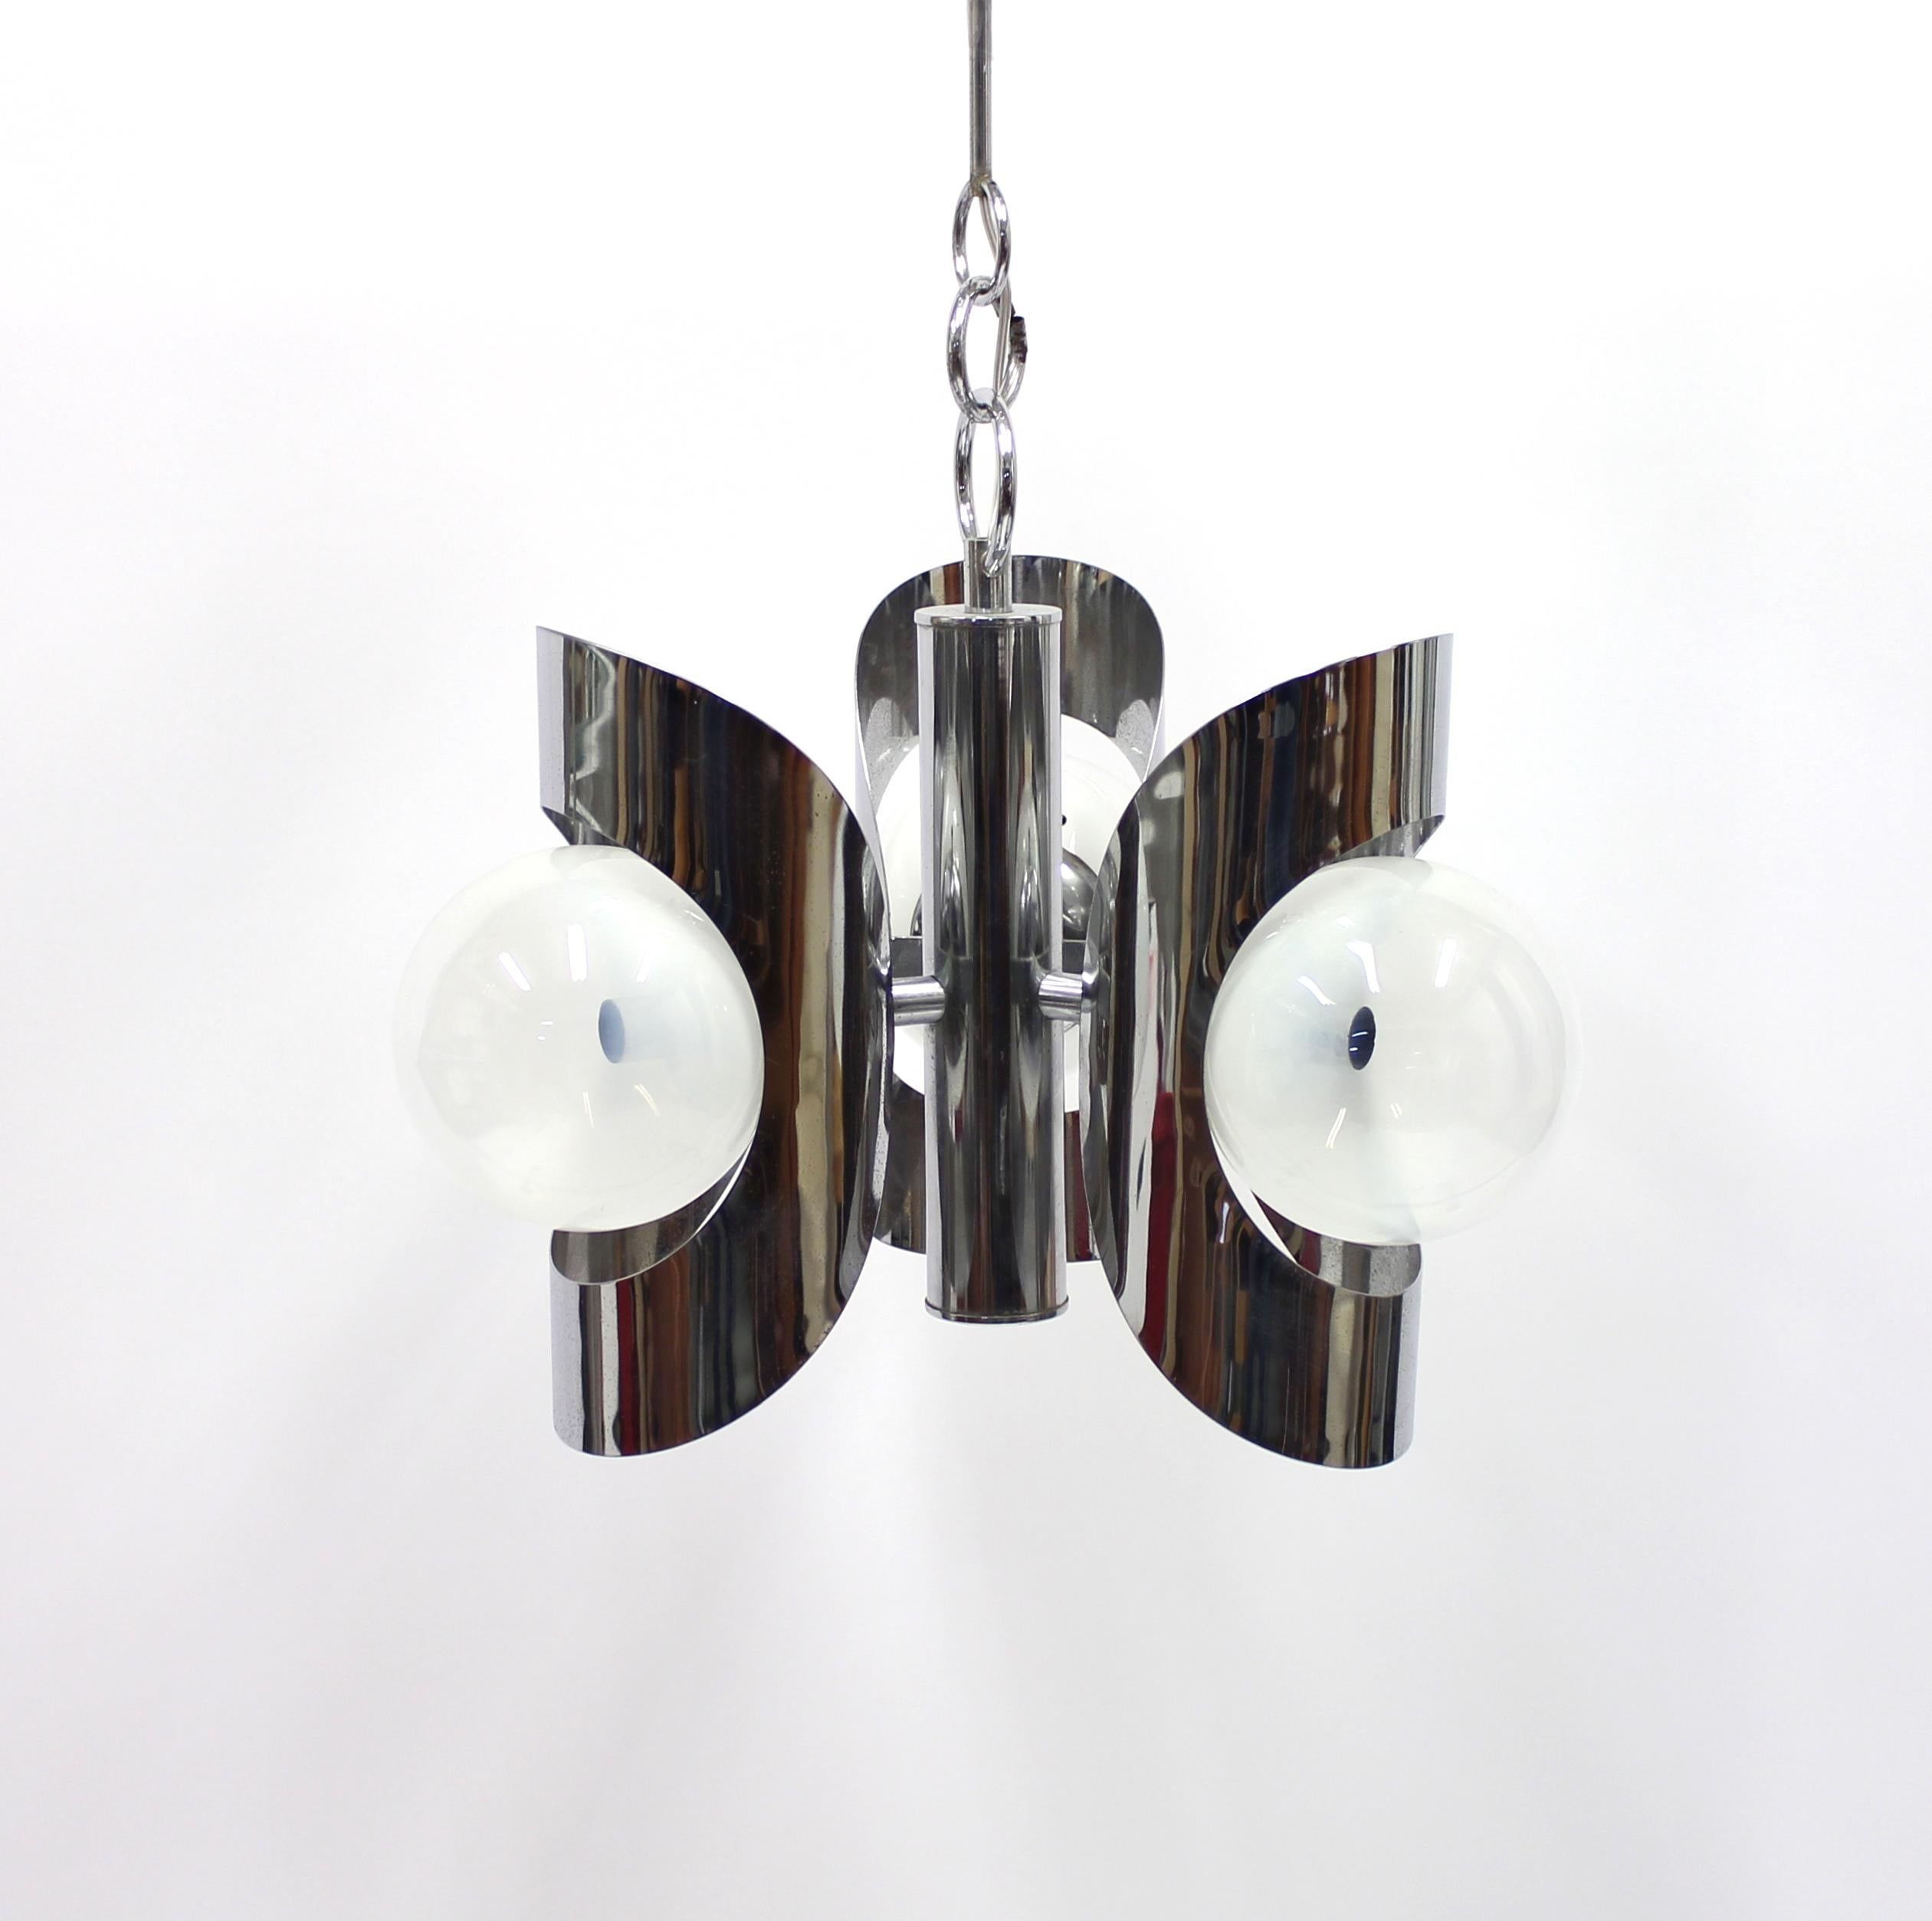 Italian 1960s ceiling light with three faded opaline globes that sits on a chrome-plated construction. Light ware consistent with age and use.